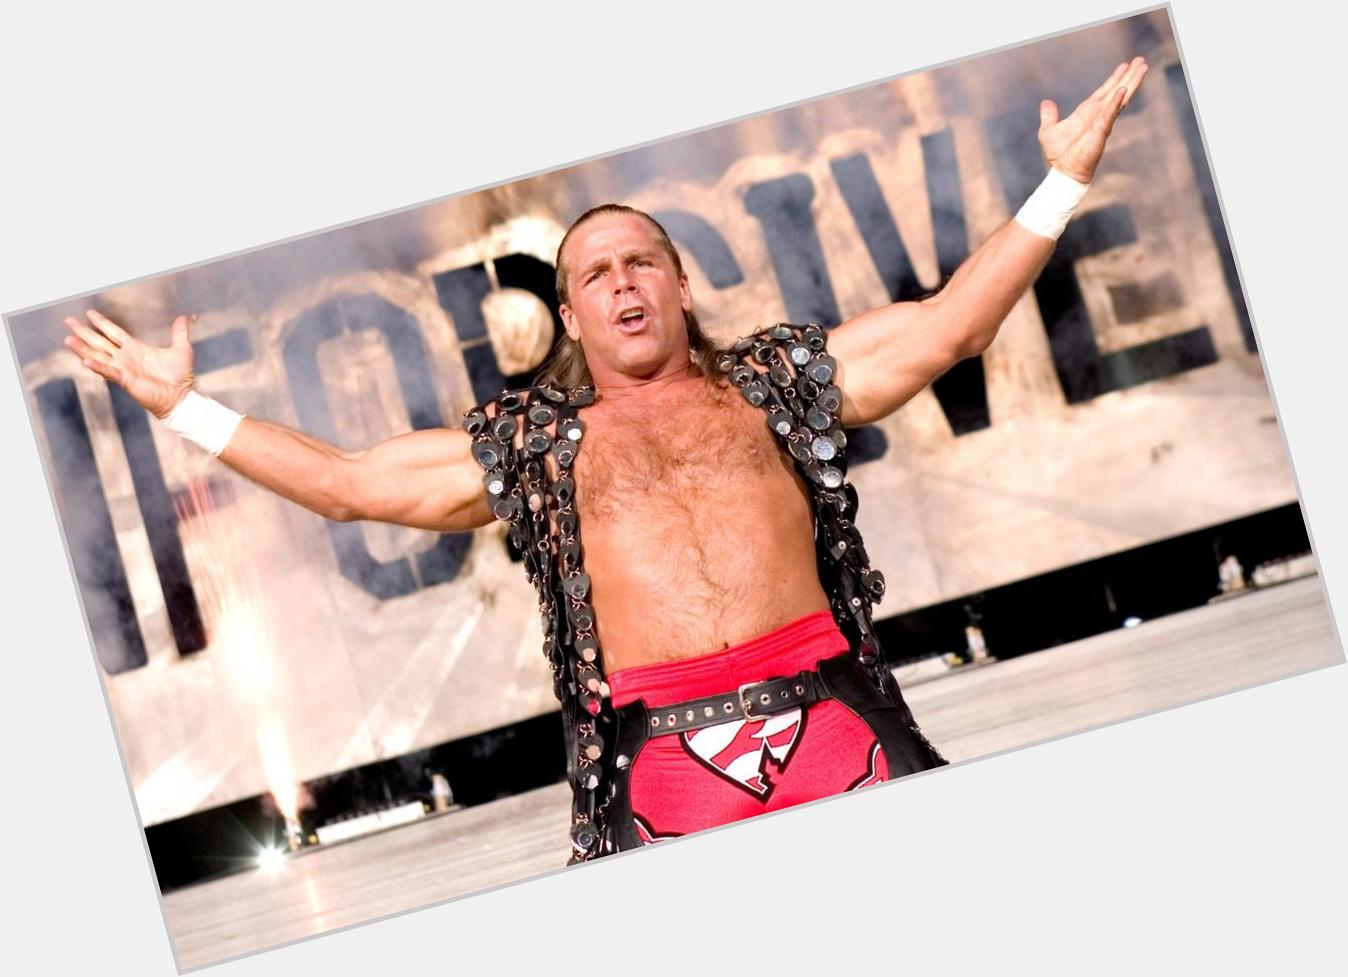 Happy birthday to the showstopper the headliner the Main Event Mr Wrestlemania 

HBK Shawn Michaels! 